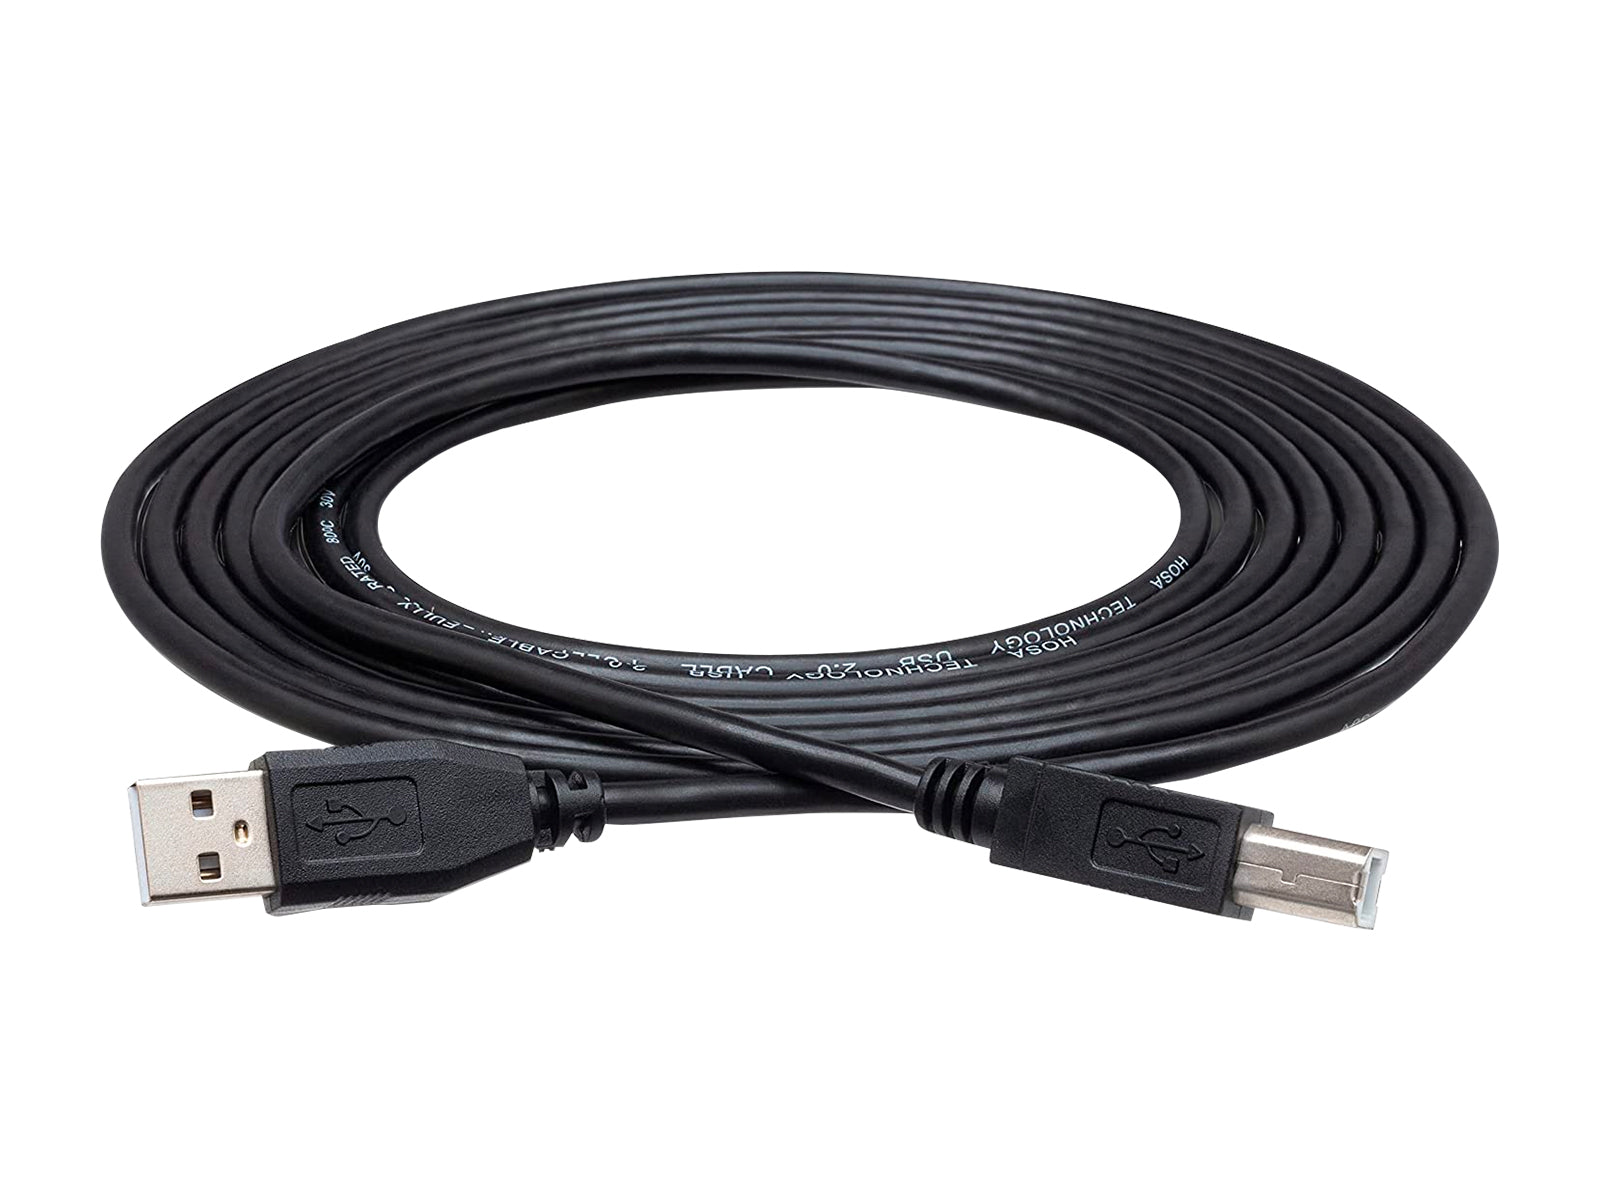 USB Type-A to USB Type-B Video Signal Cable 6ft (39917) Monitors.com 